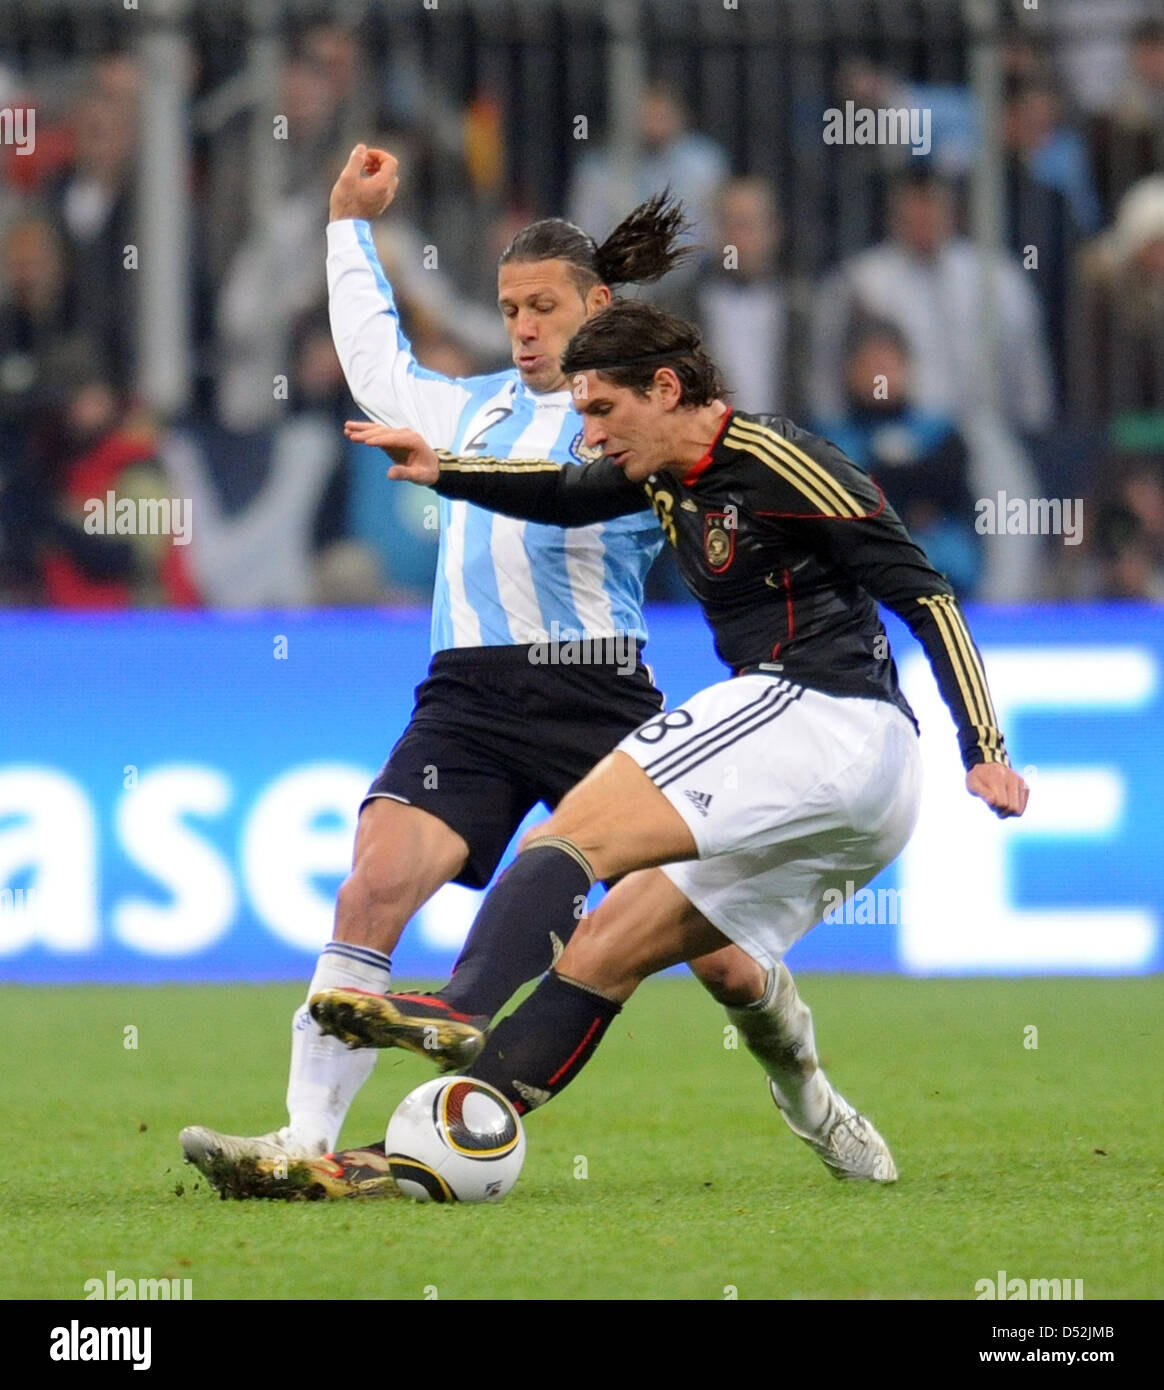 Germany's Mario Gomez (R) and Argentina's Martin Demichelis vie for the ball during the soccer friendly match Germany vs Argentina at AllianzArena stadium in Munich, Germany, 03 March 2010. Photo: Bernd Weissbrod Stock Photo